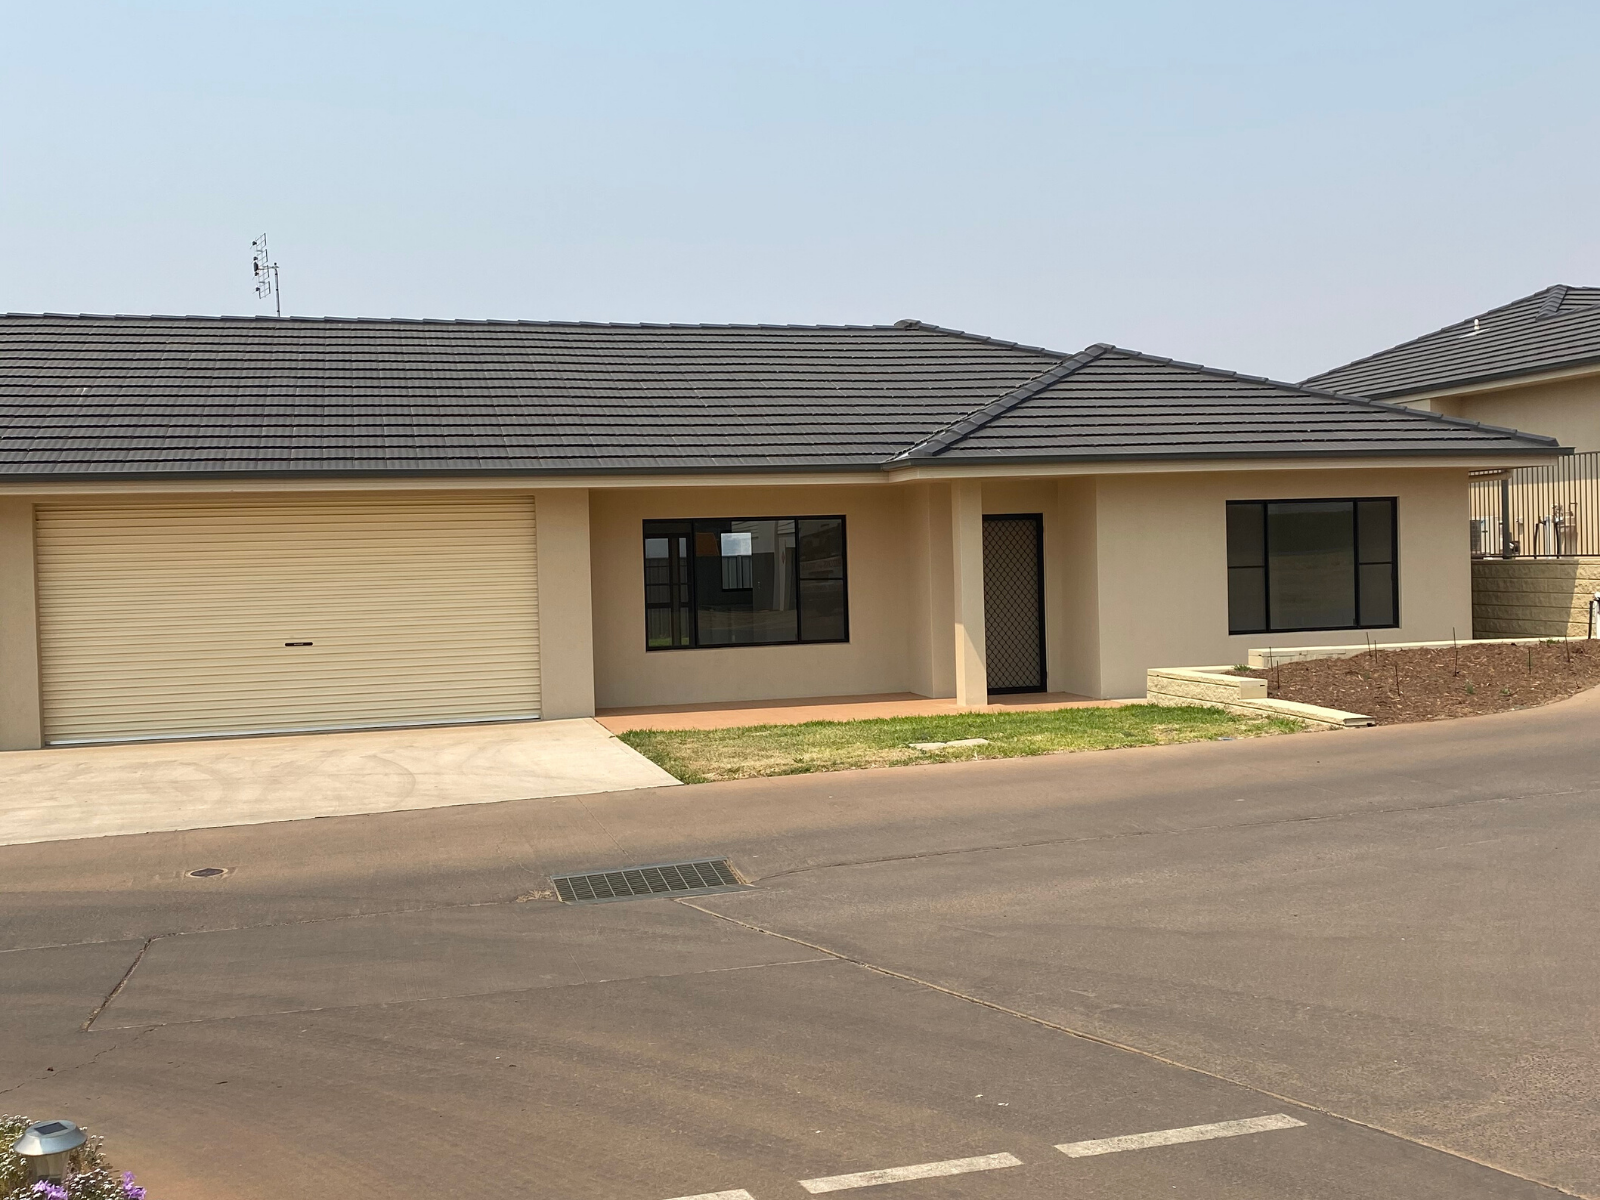 Horizons-Village-Dubbo-Front | RSL LifeCare - provide care and service to war veterans, retirement villages and accommodation, aged care services and assisted living